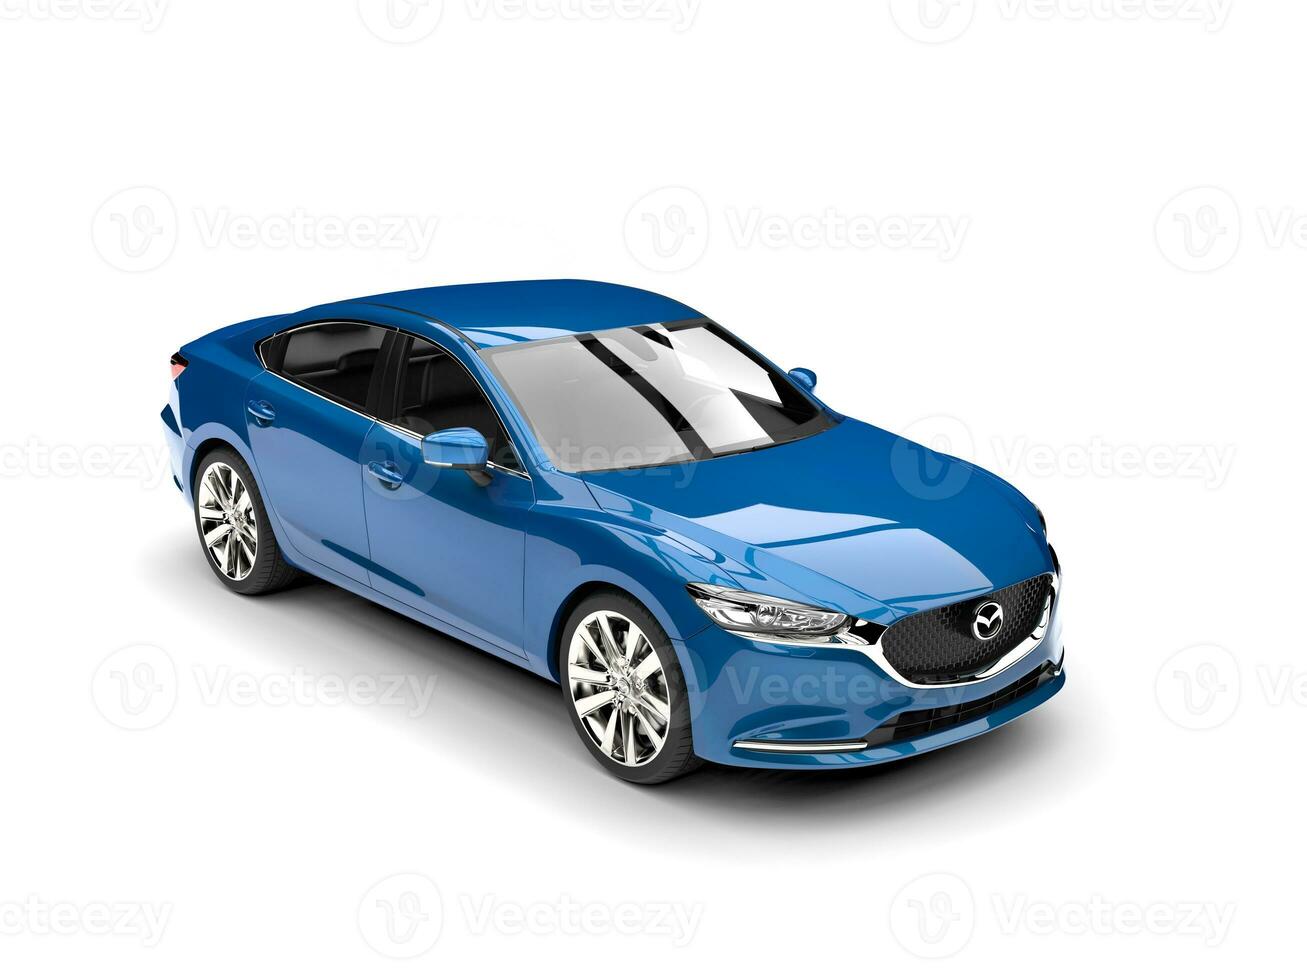 Blue Mazda 6 2018 - 2021 model - top down angle - 3D Illustration - isolated on white background photo